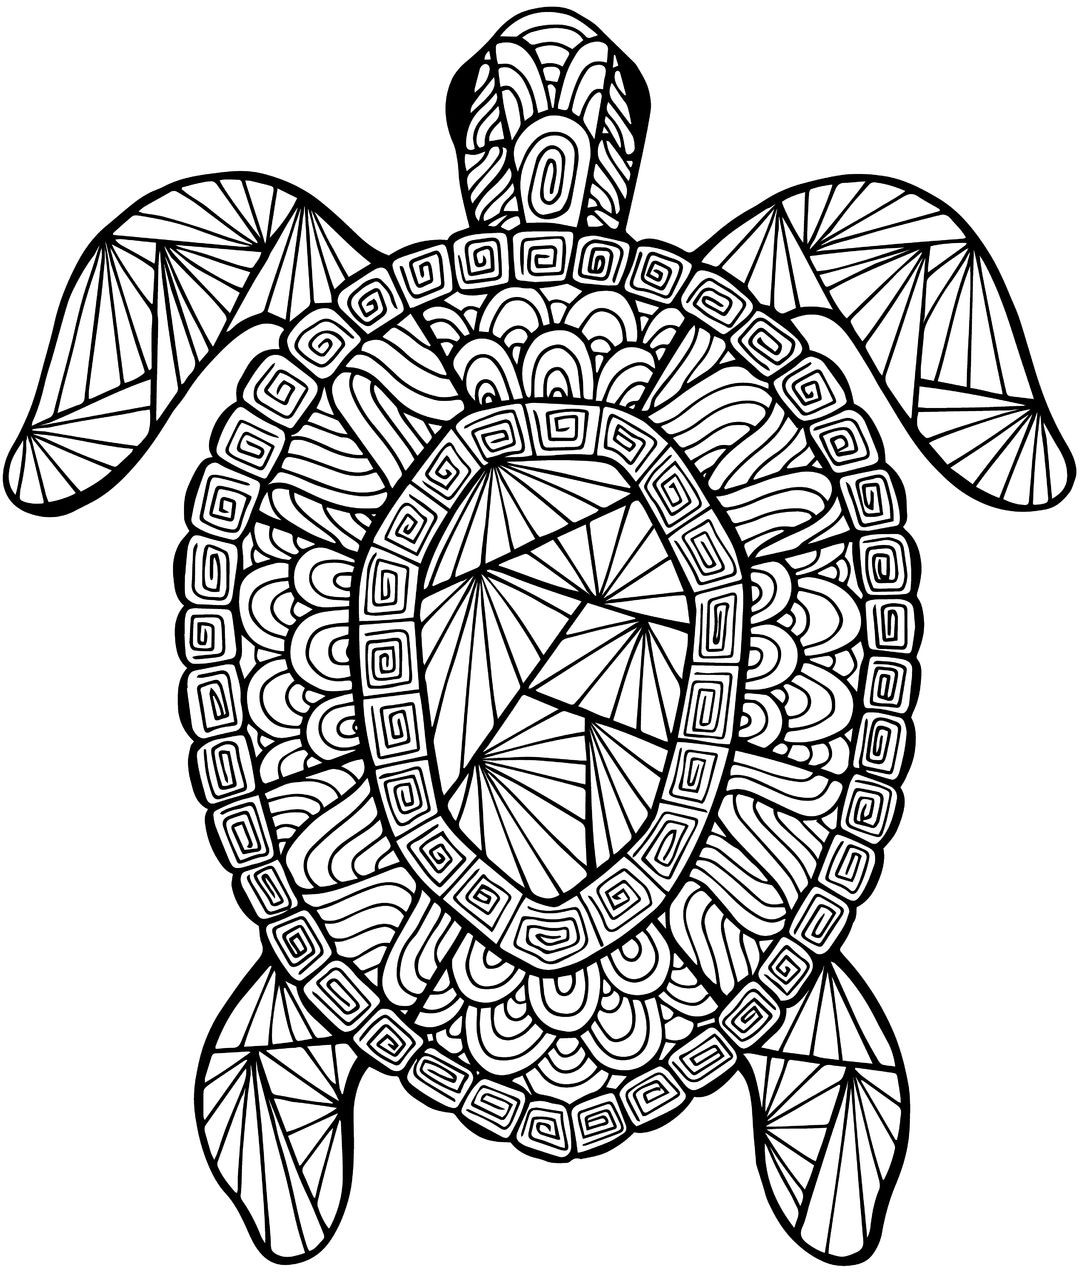 Turtle Coloring Pages For Adults
 Detailed Sea Turtle Advanced Coloring Page